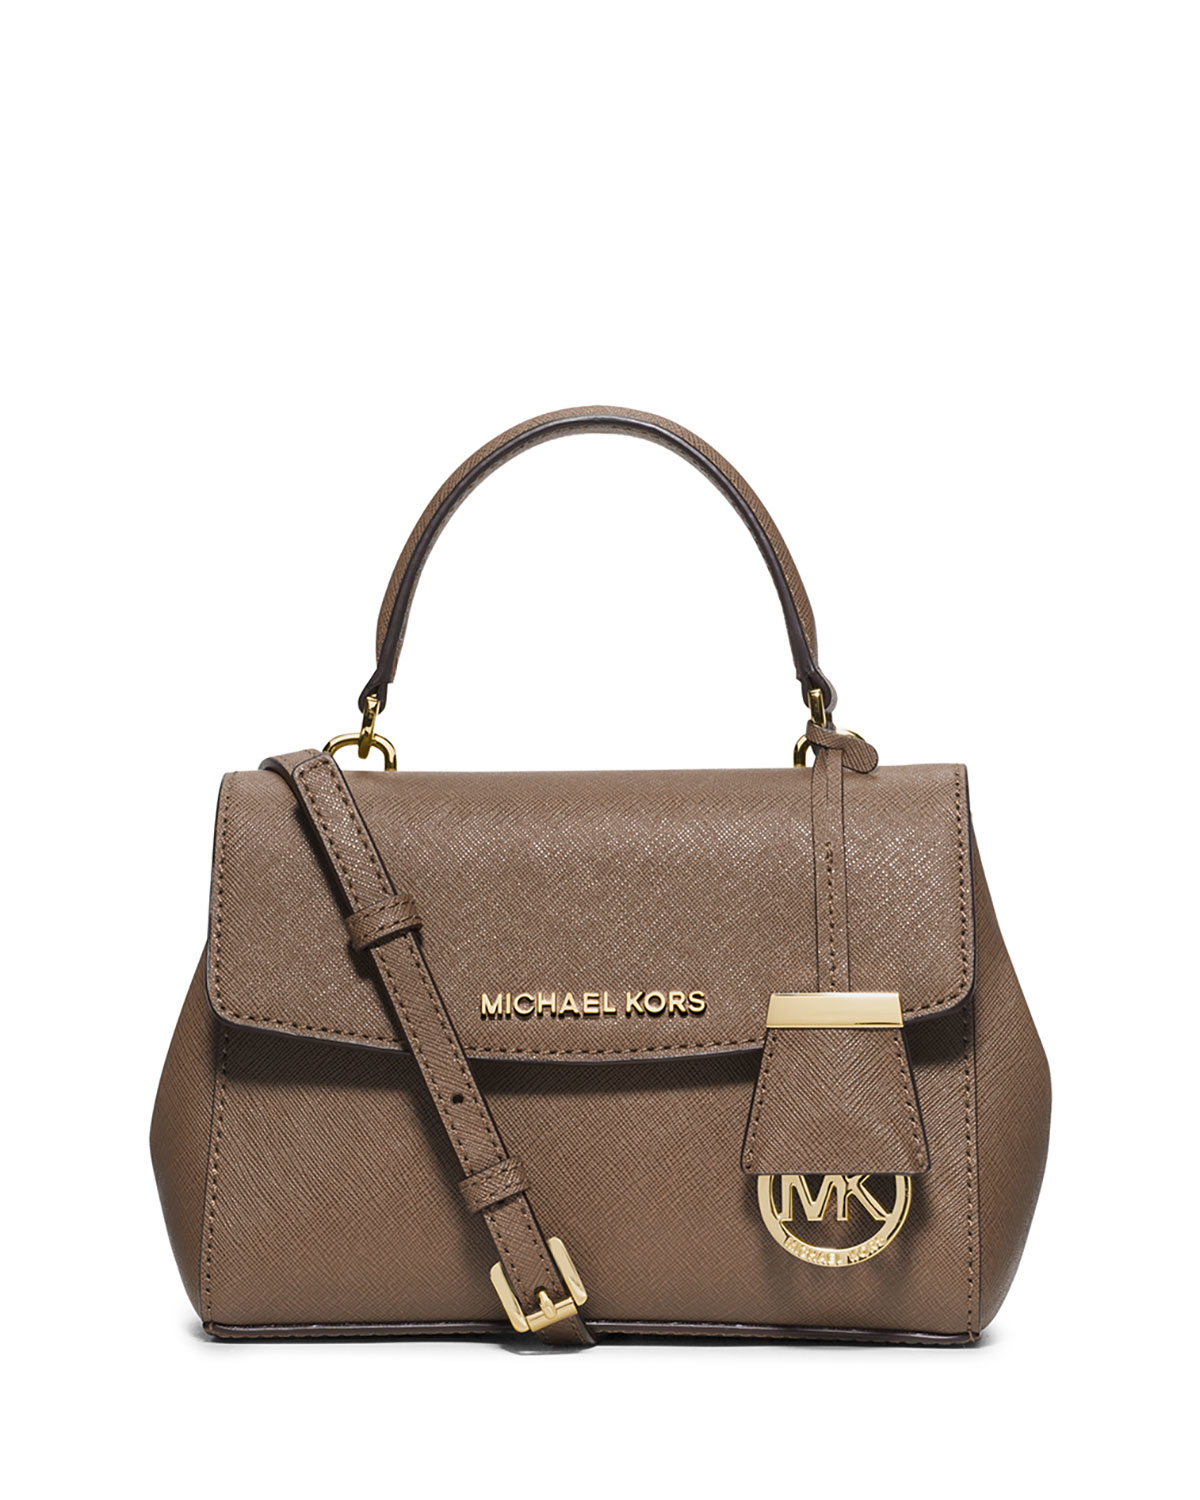 Lyst - Michael Michael Kors Ava Extra-Small Cross-Body Bag in Brown